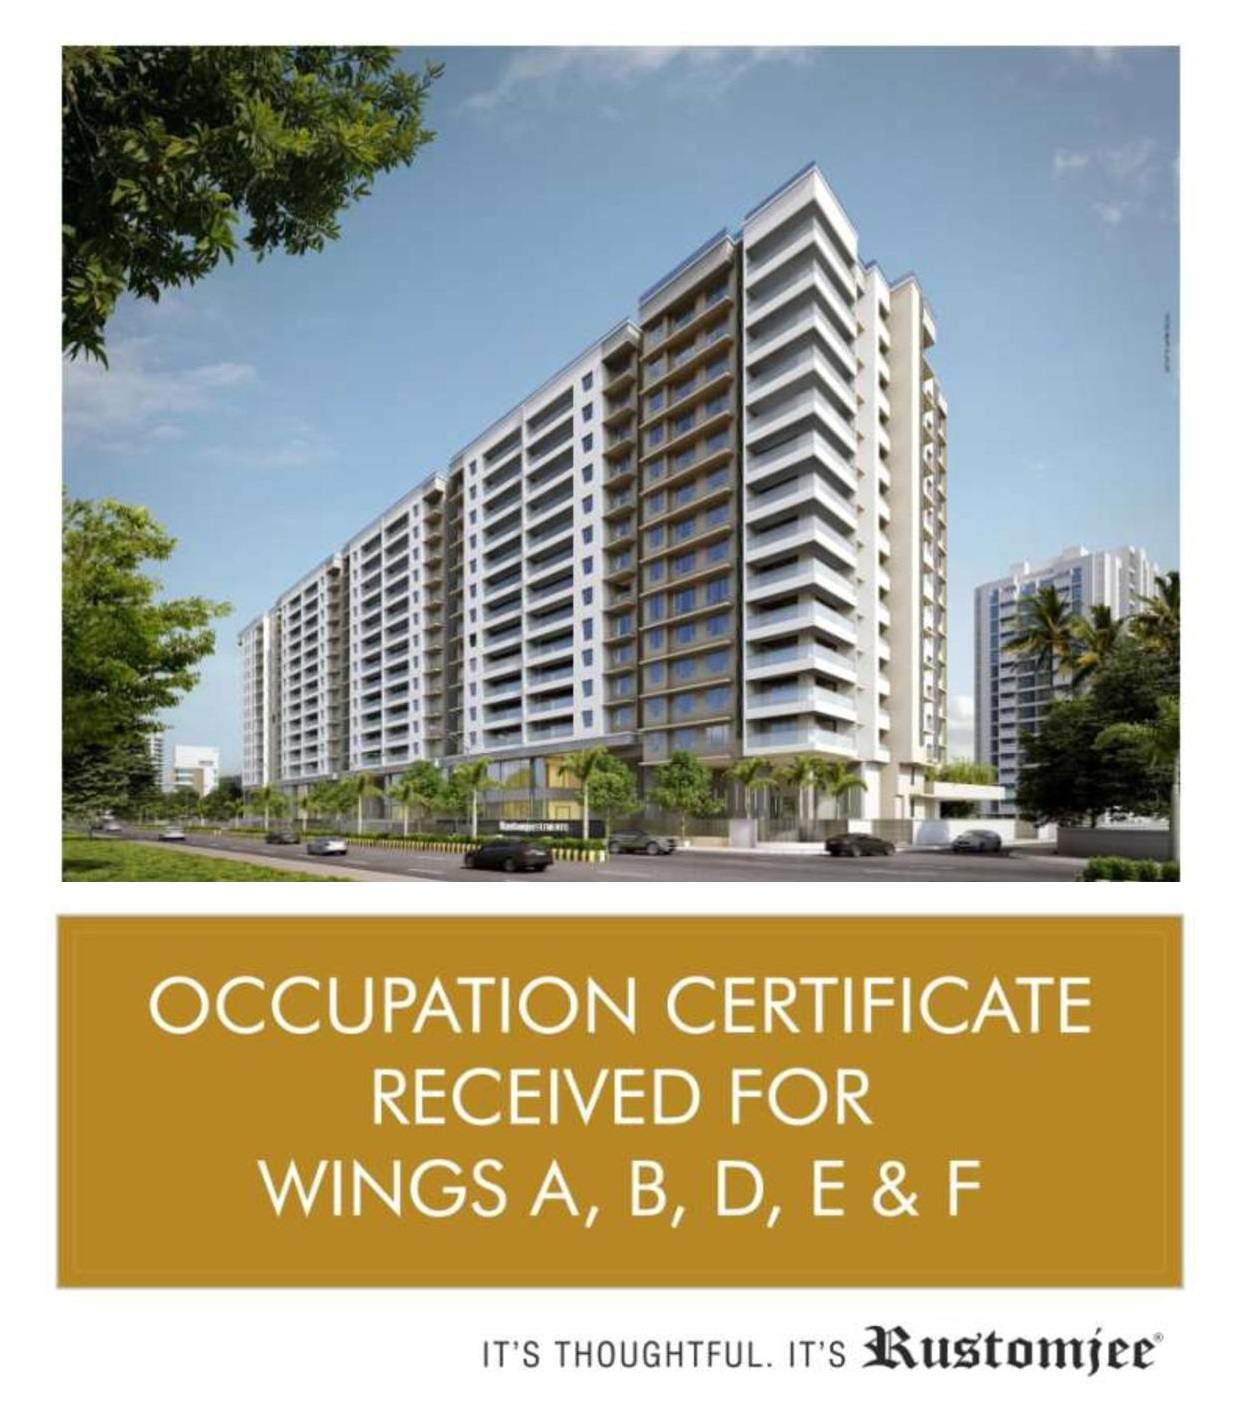 Occupation Certificate received for Wings A, B, D & F at Rustomjee Elements in Mumbai